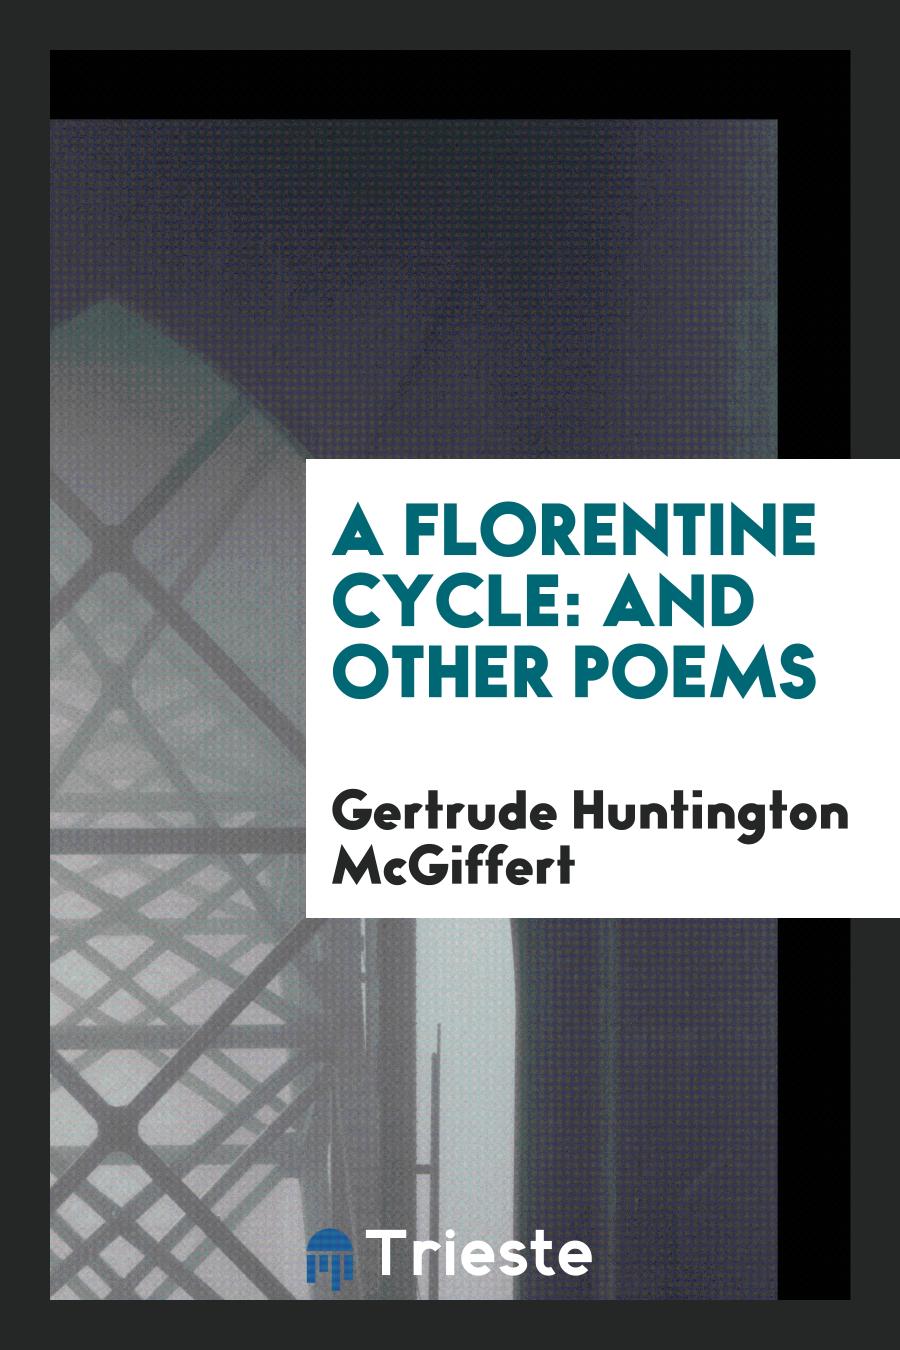 A Florentine Cycle: And Other Poems